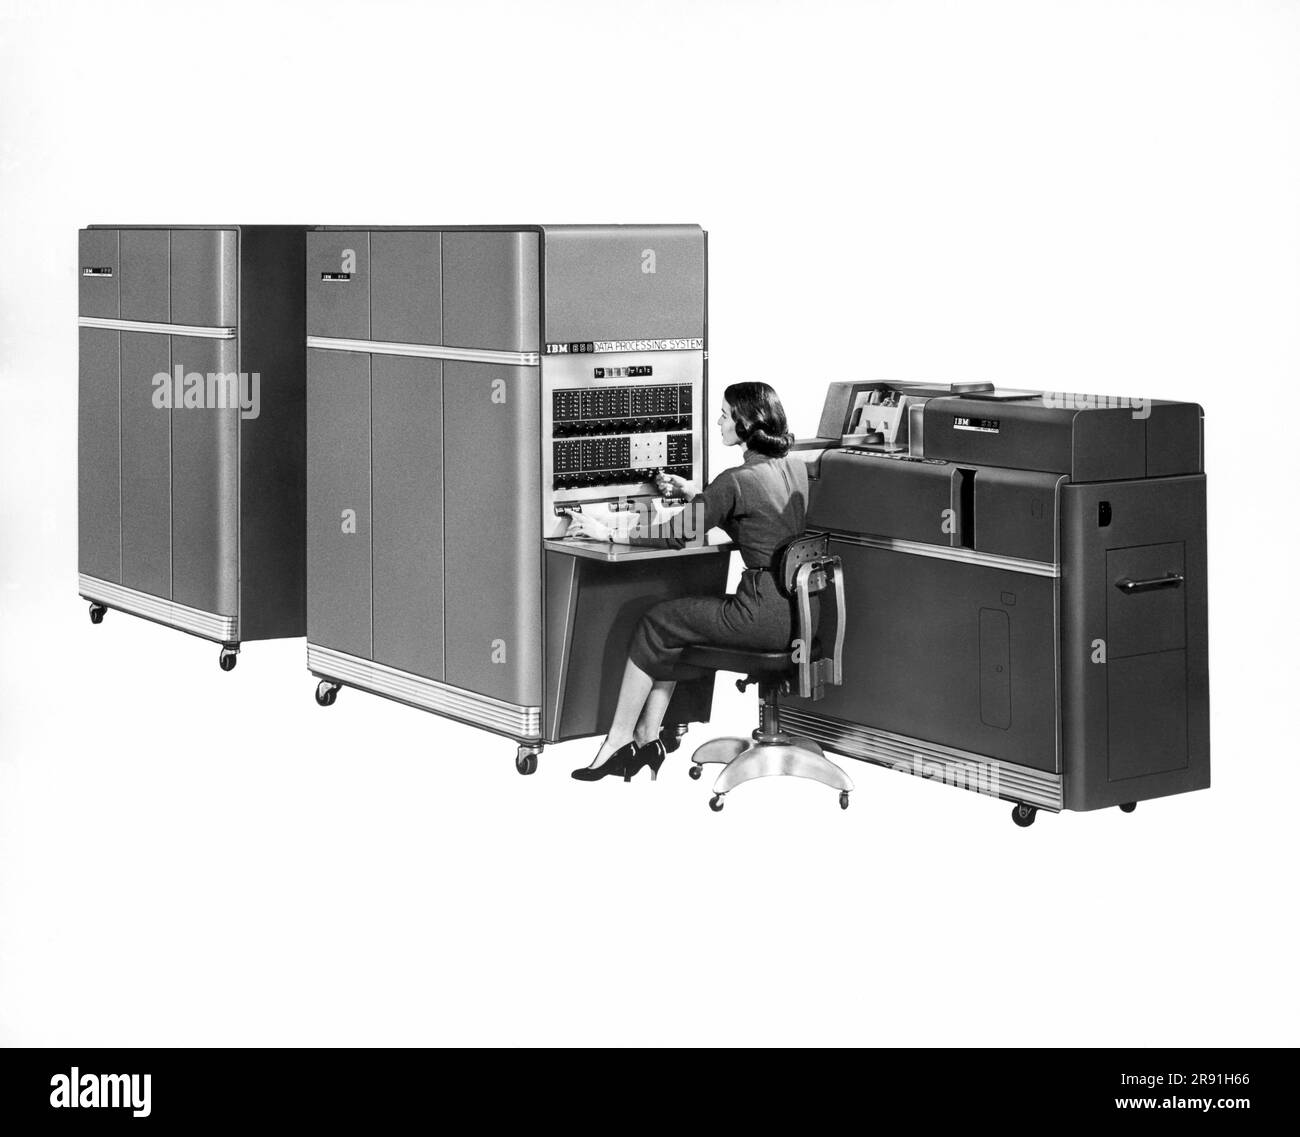 New York: 1954. IBM introduces the IBM 650 Data Processing System, which was the first mass produced computer, selling 450 of them in the first year. Stock Photo